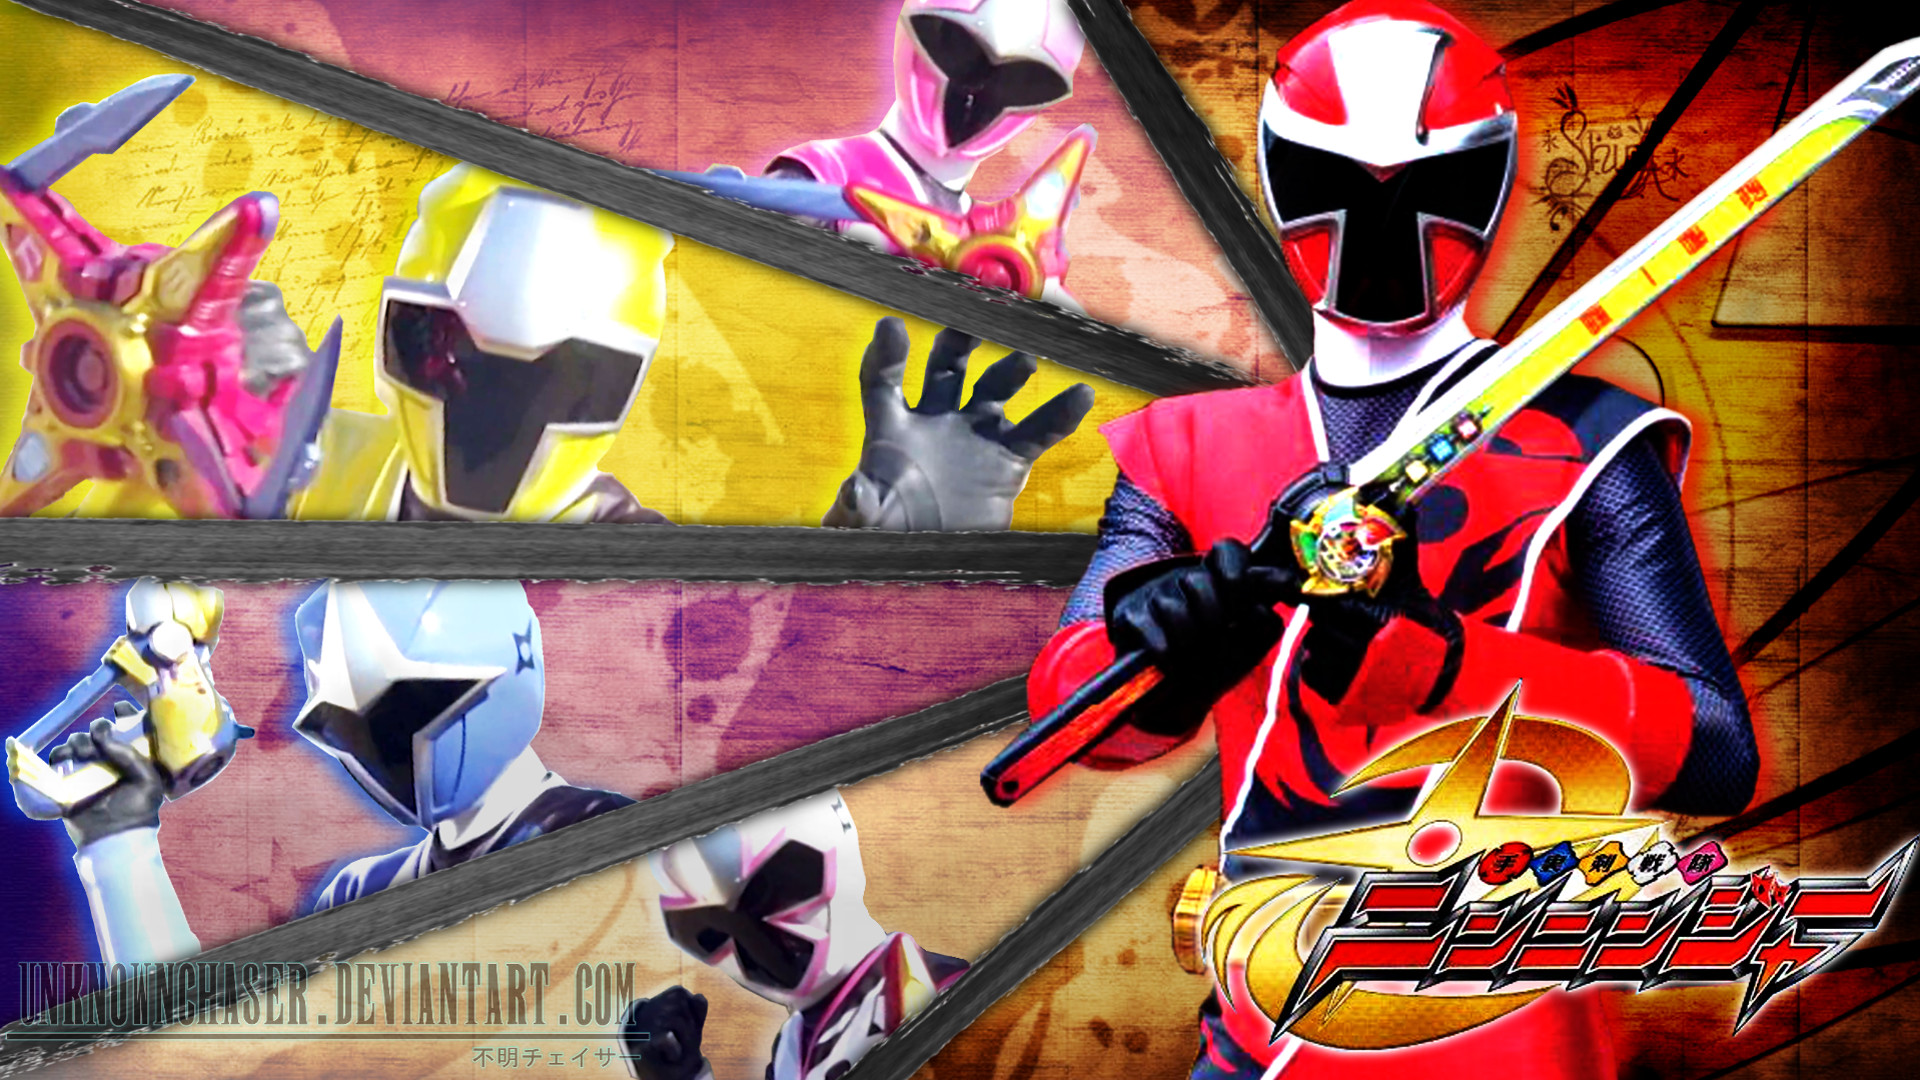 1920x1080 Top Turbo Ranger Red Wallpapers